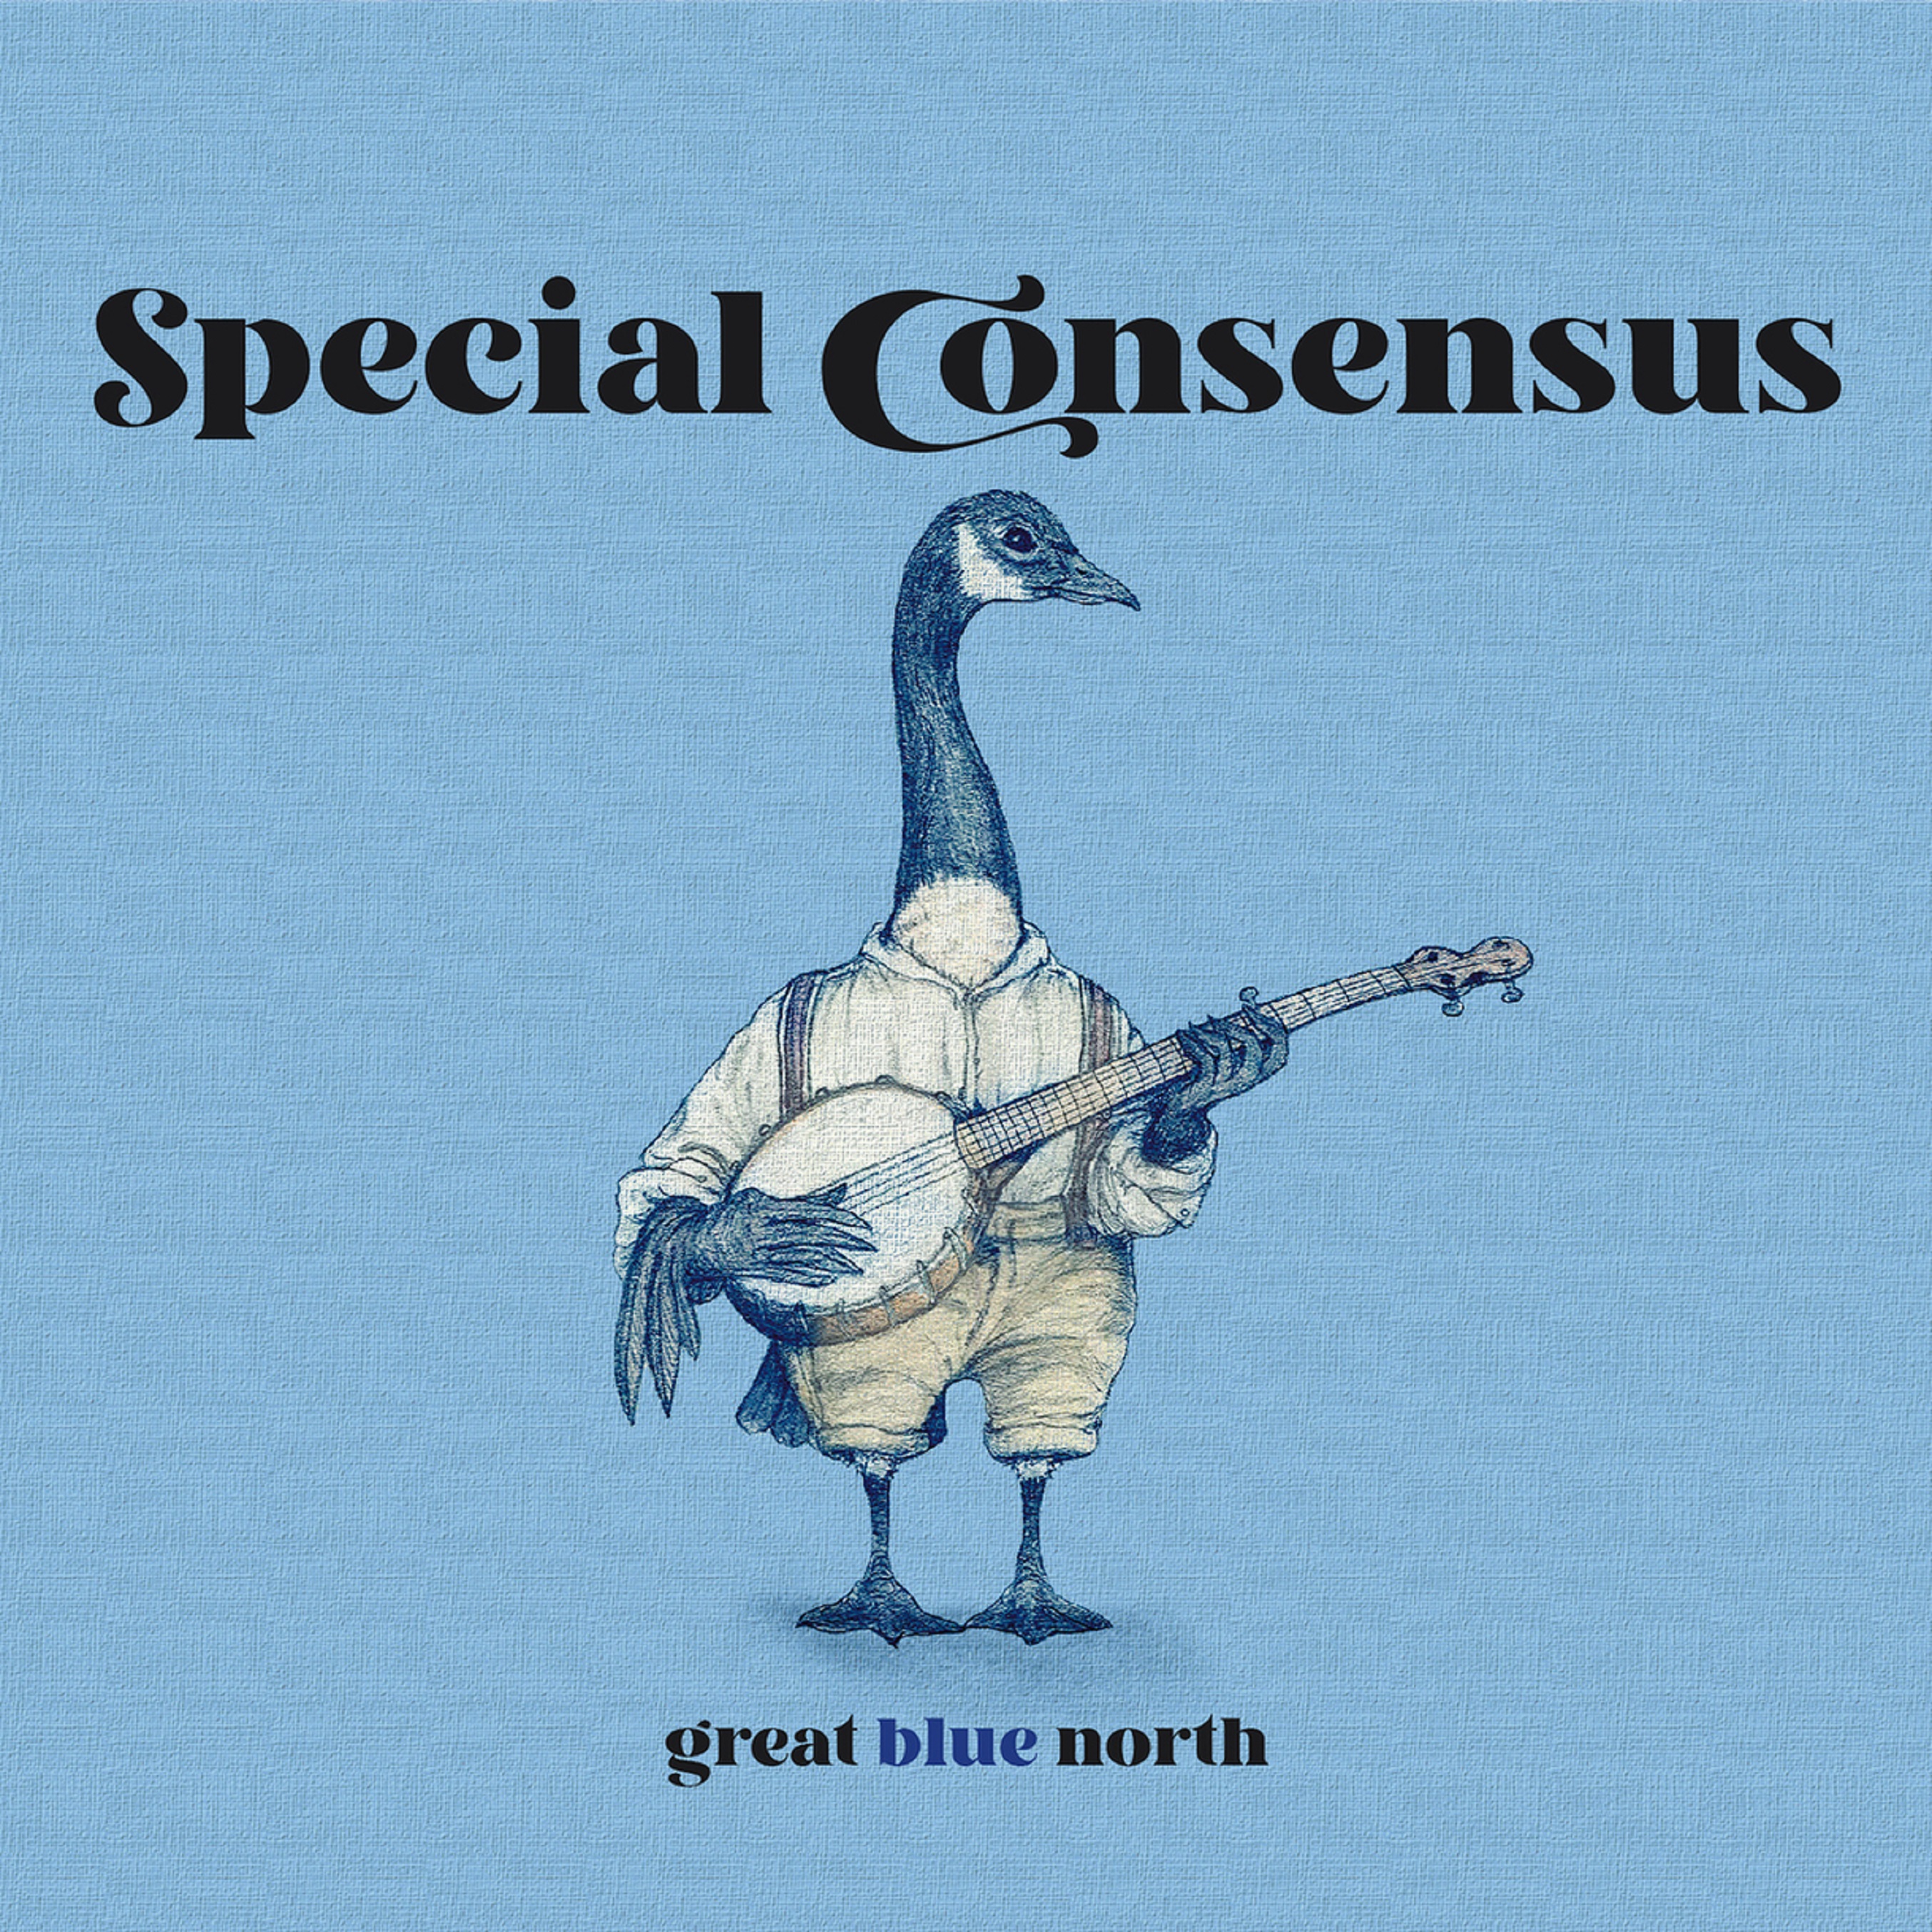 SPECIAL CONSENSUS NEW ALBUM GREAT BLUE NORTH OUT MAY 12TH